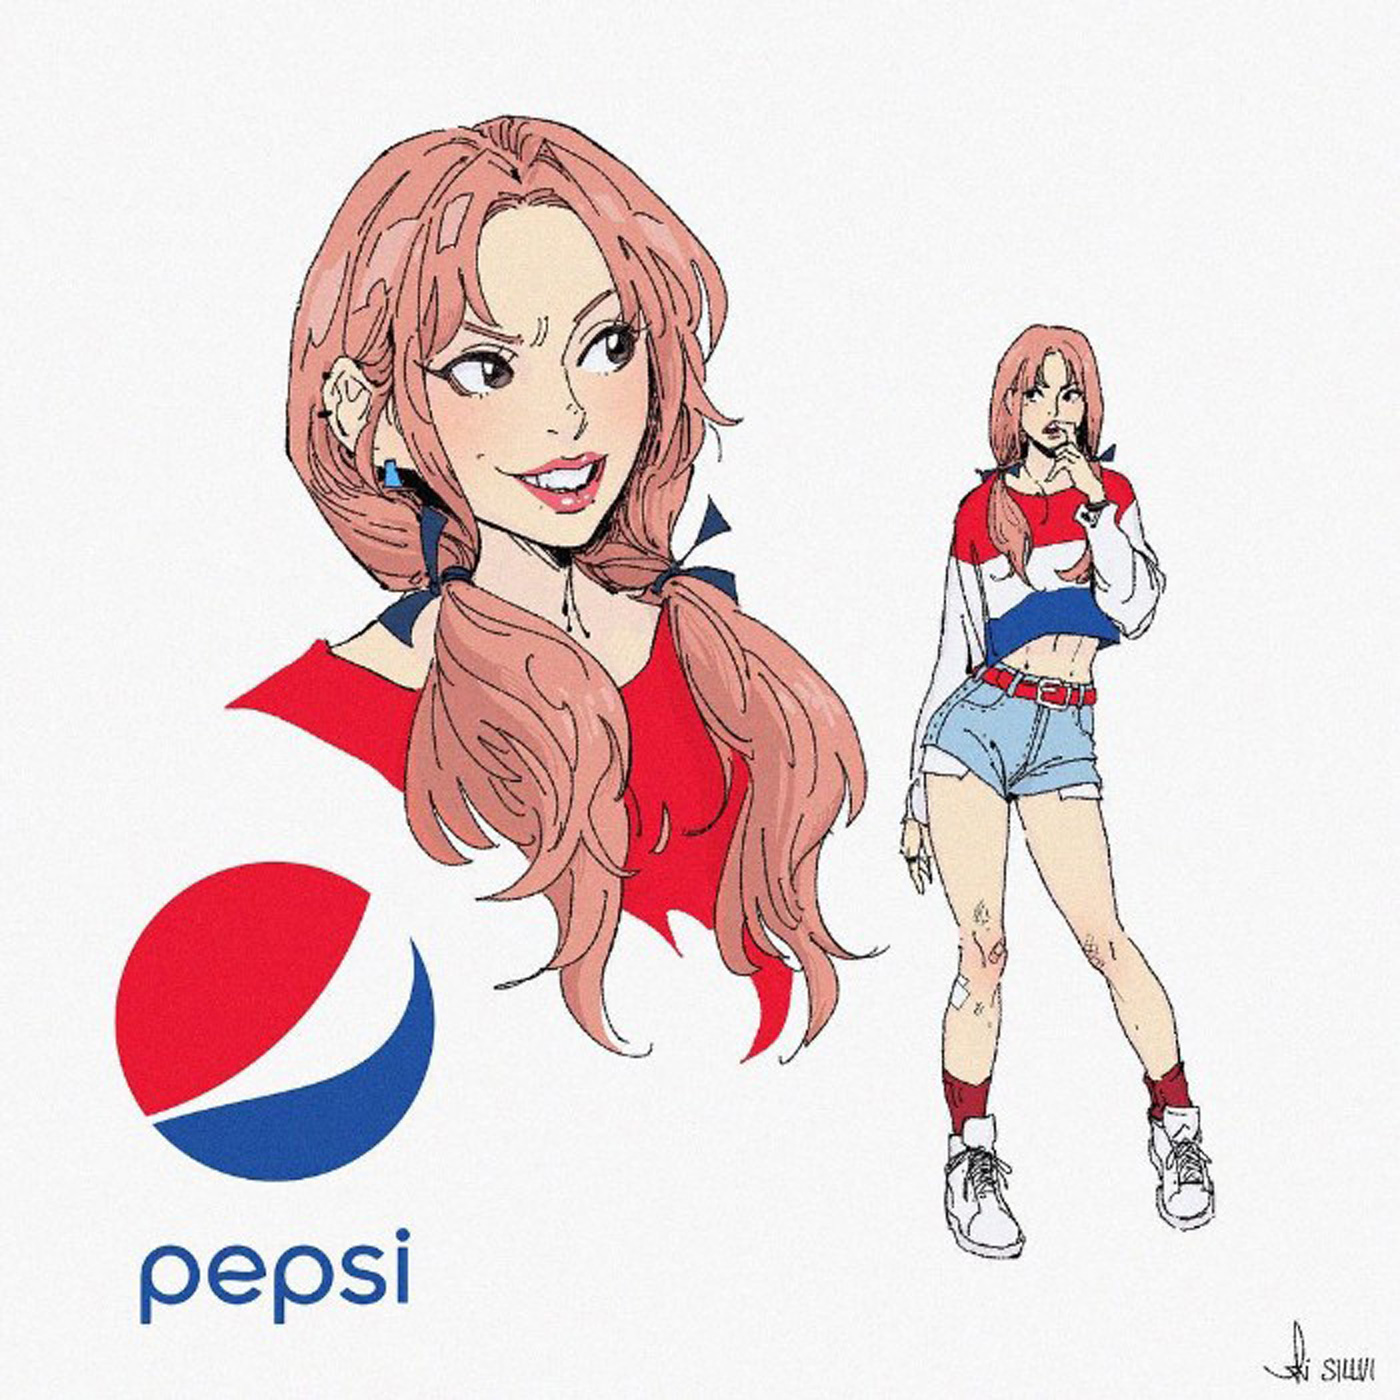 Illustrations of pepsi brand soft drink  with female characters